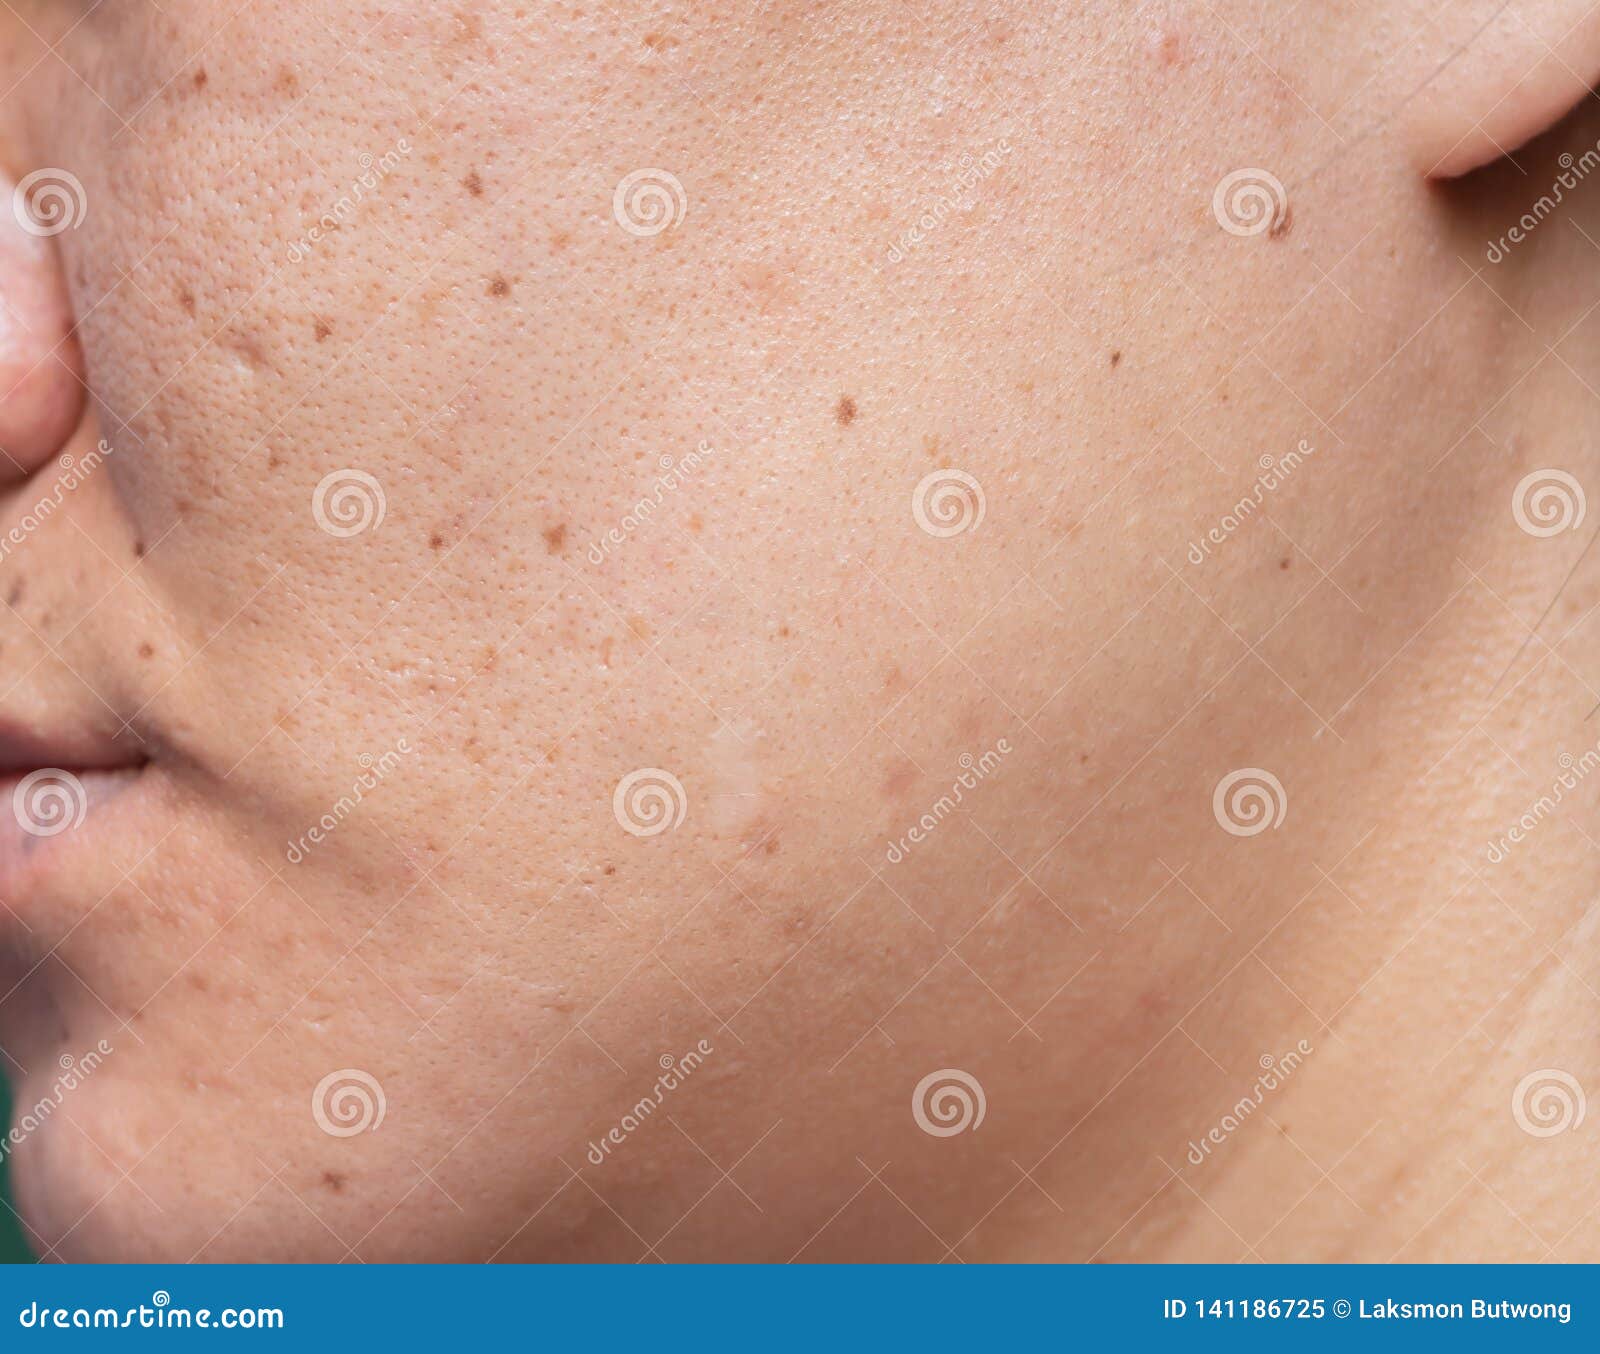 white acne scars on face